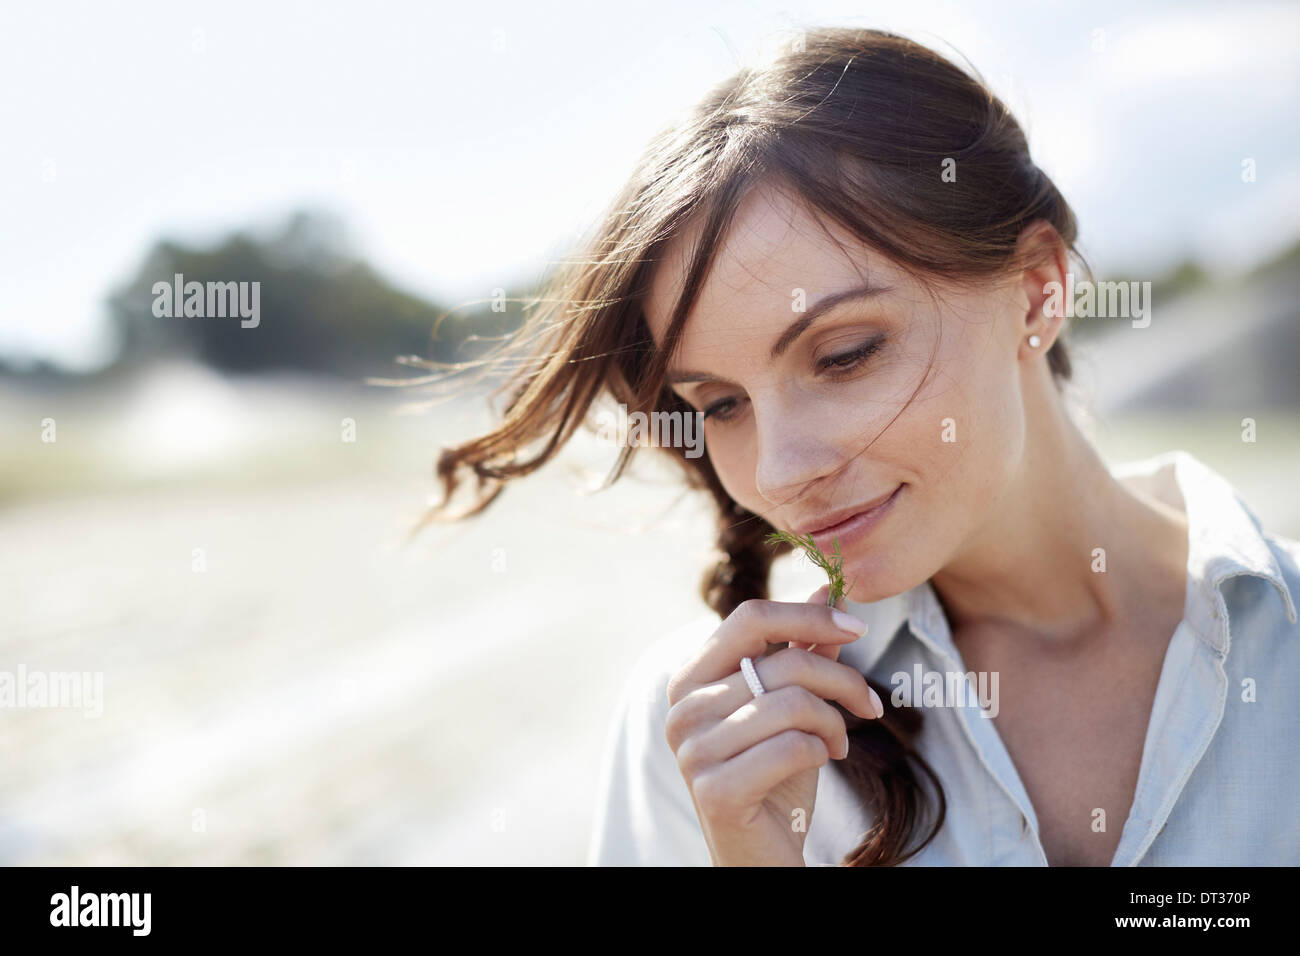 A young woman with windblown hair with a small green sprig of plant material in her hand Stock Photo